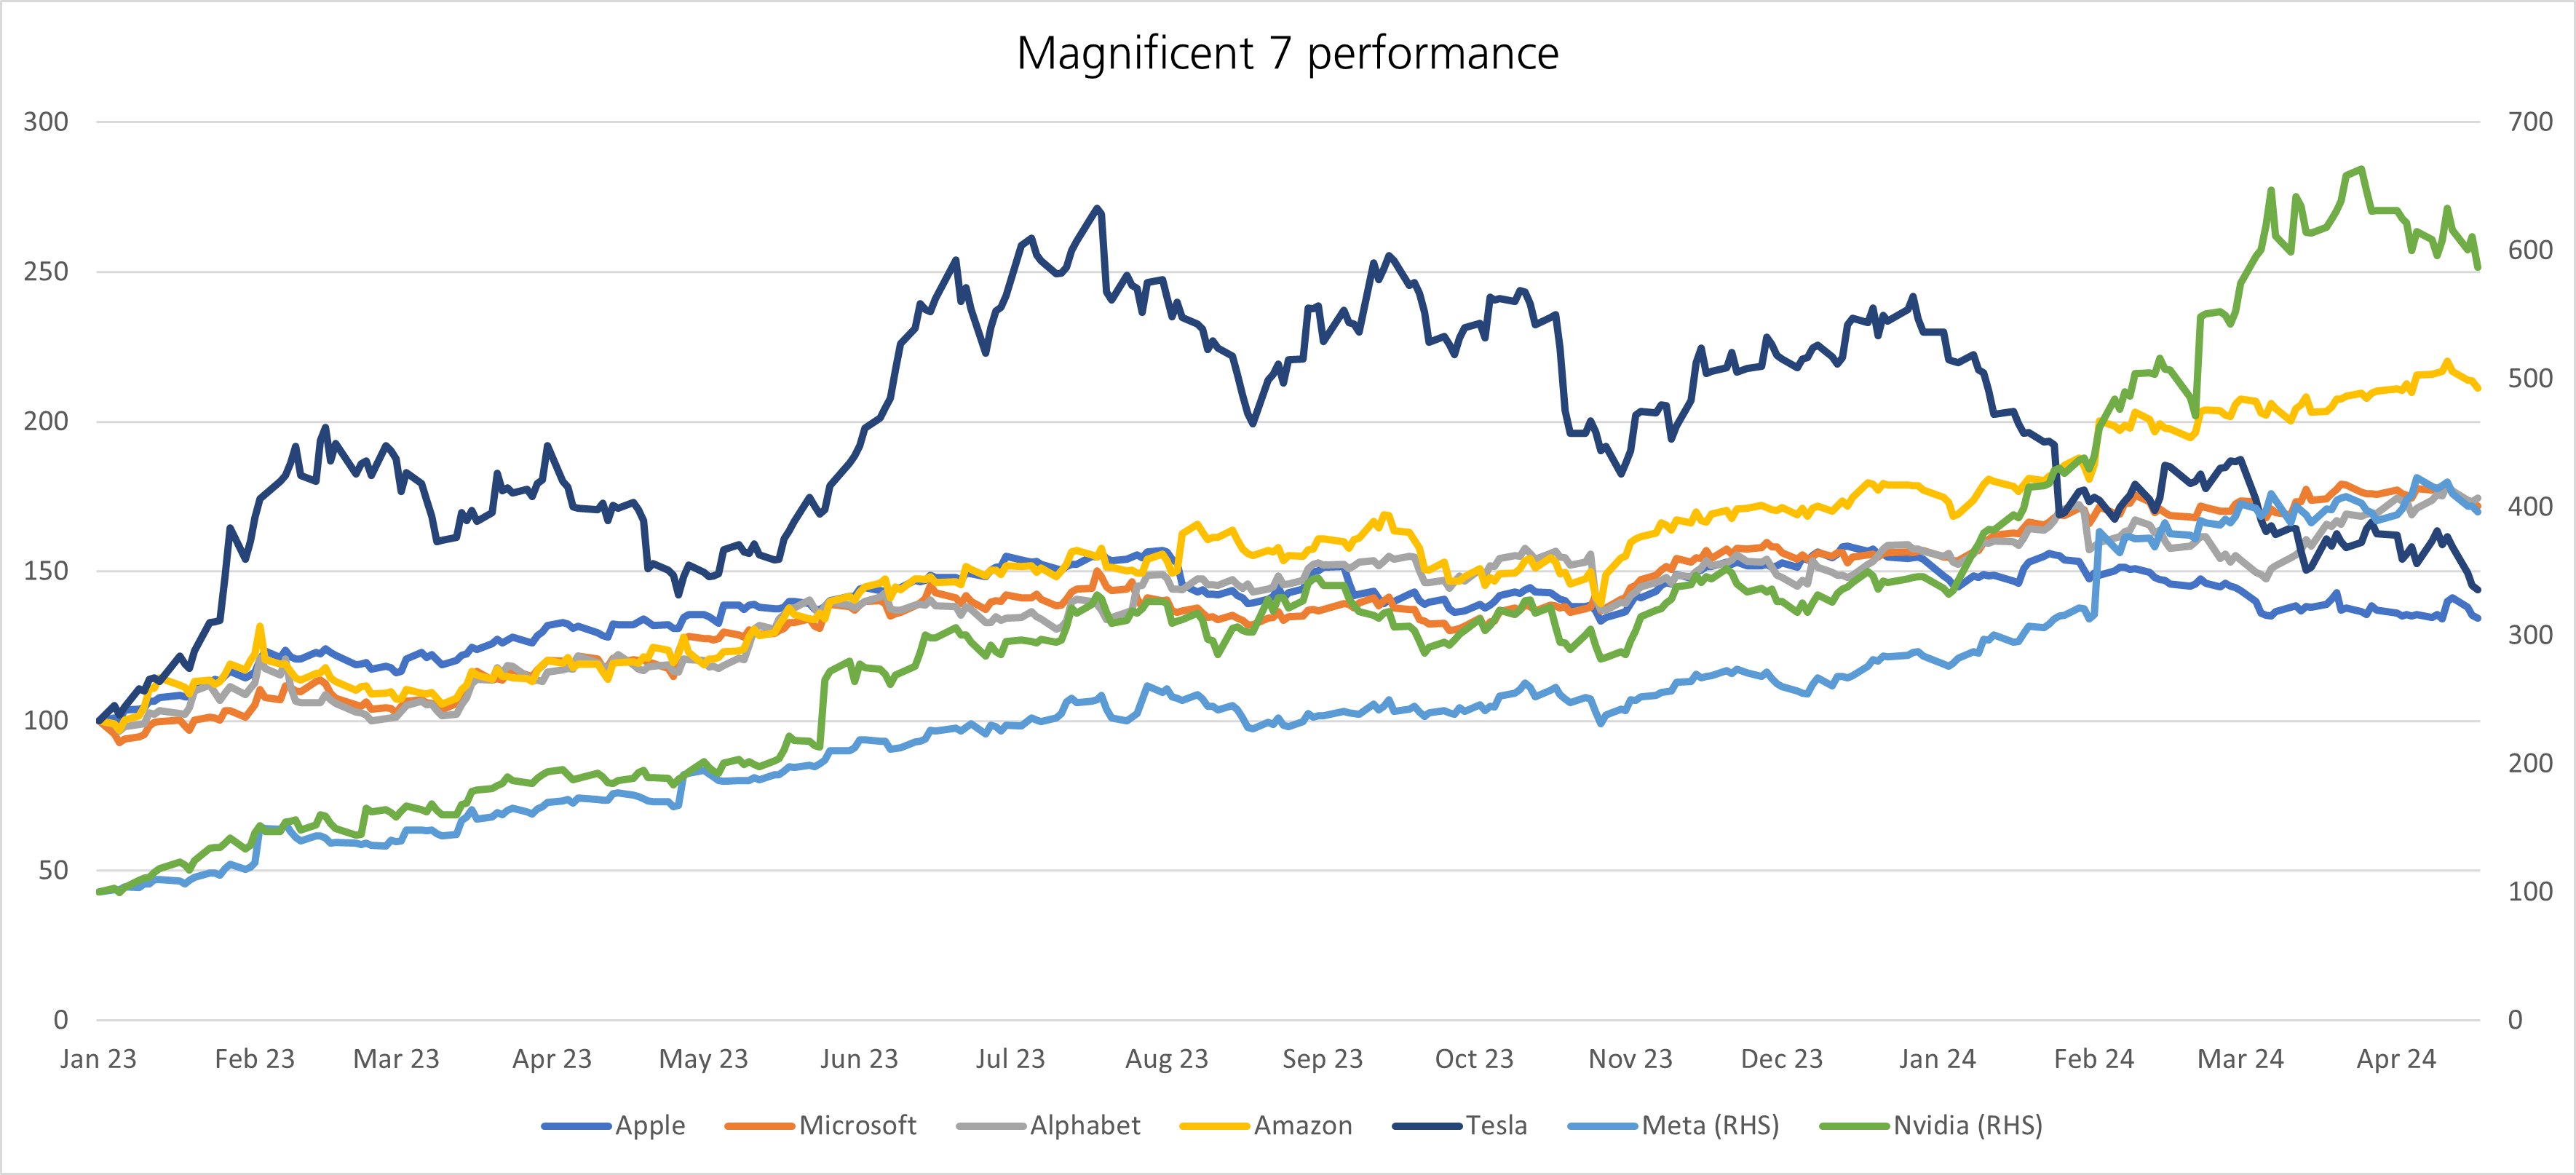 Magnificent 7 performance chart